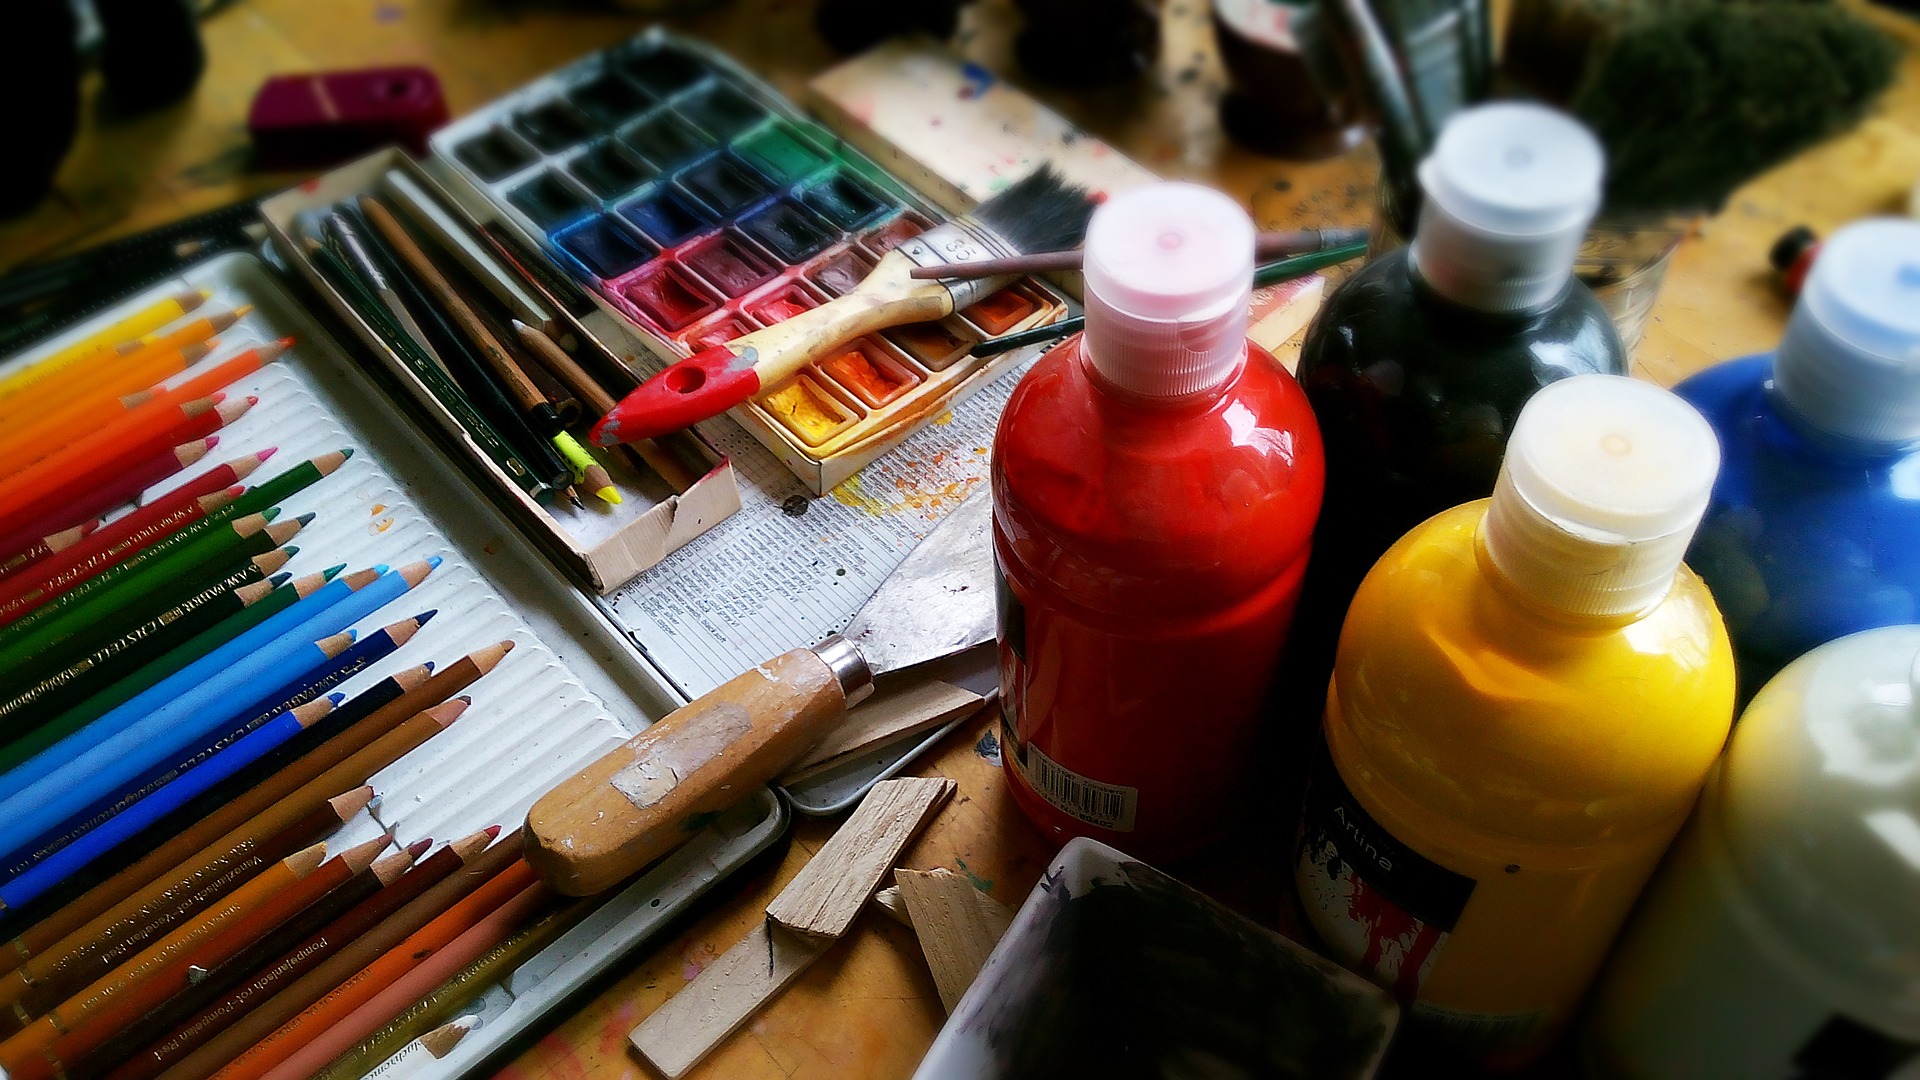 A selection of artist materials